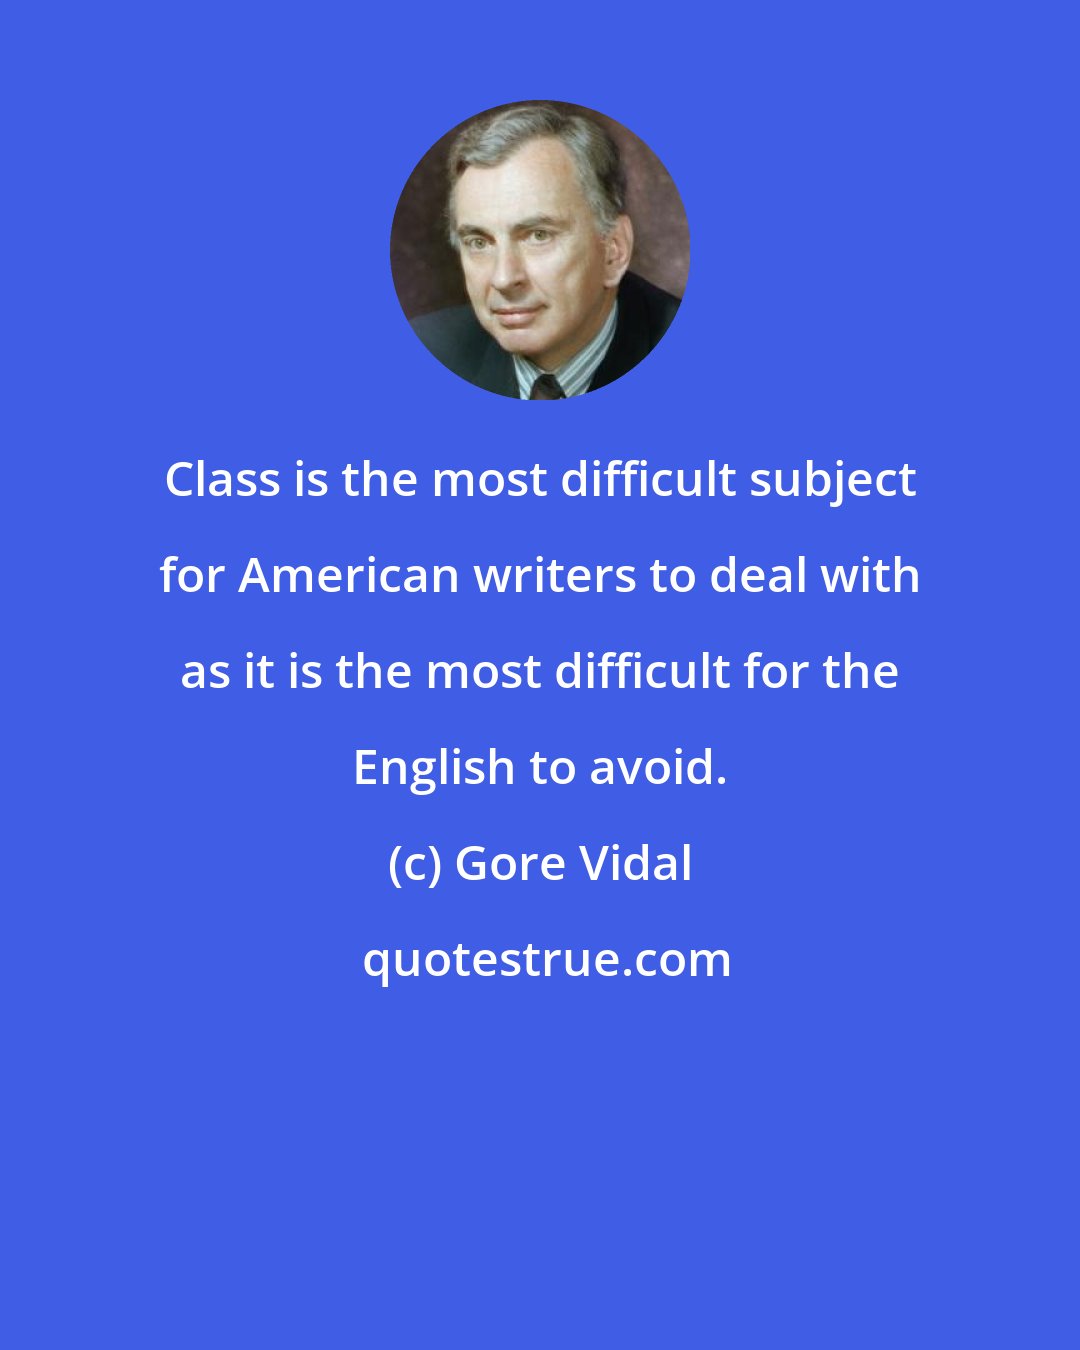 Gore Vidal: Class is the most difficult subject for American writers to deal with as it is the most difficult for the English to avoid.